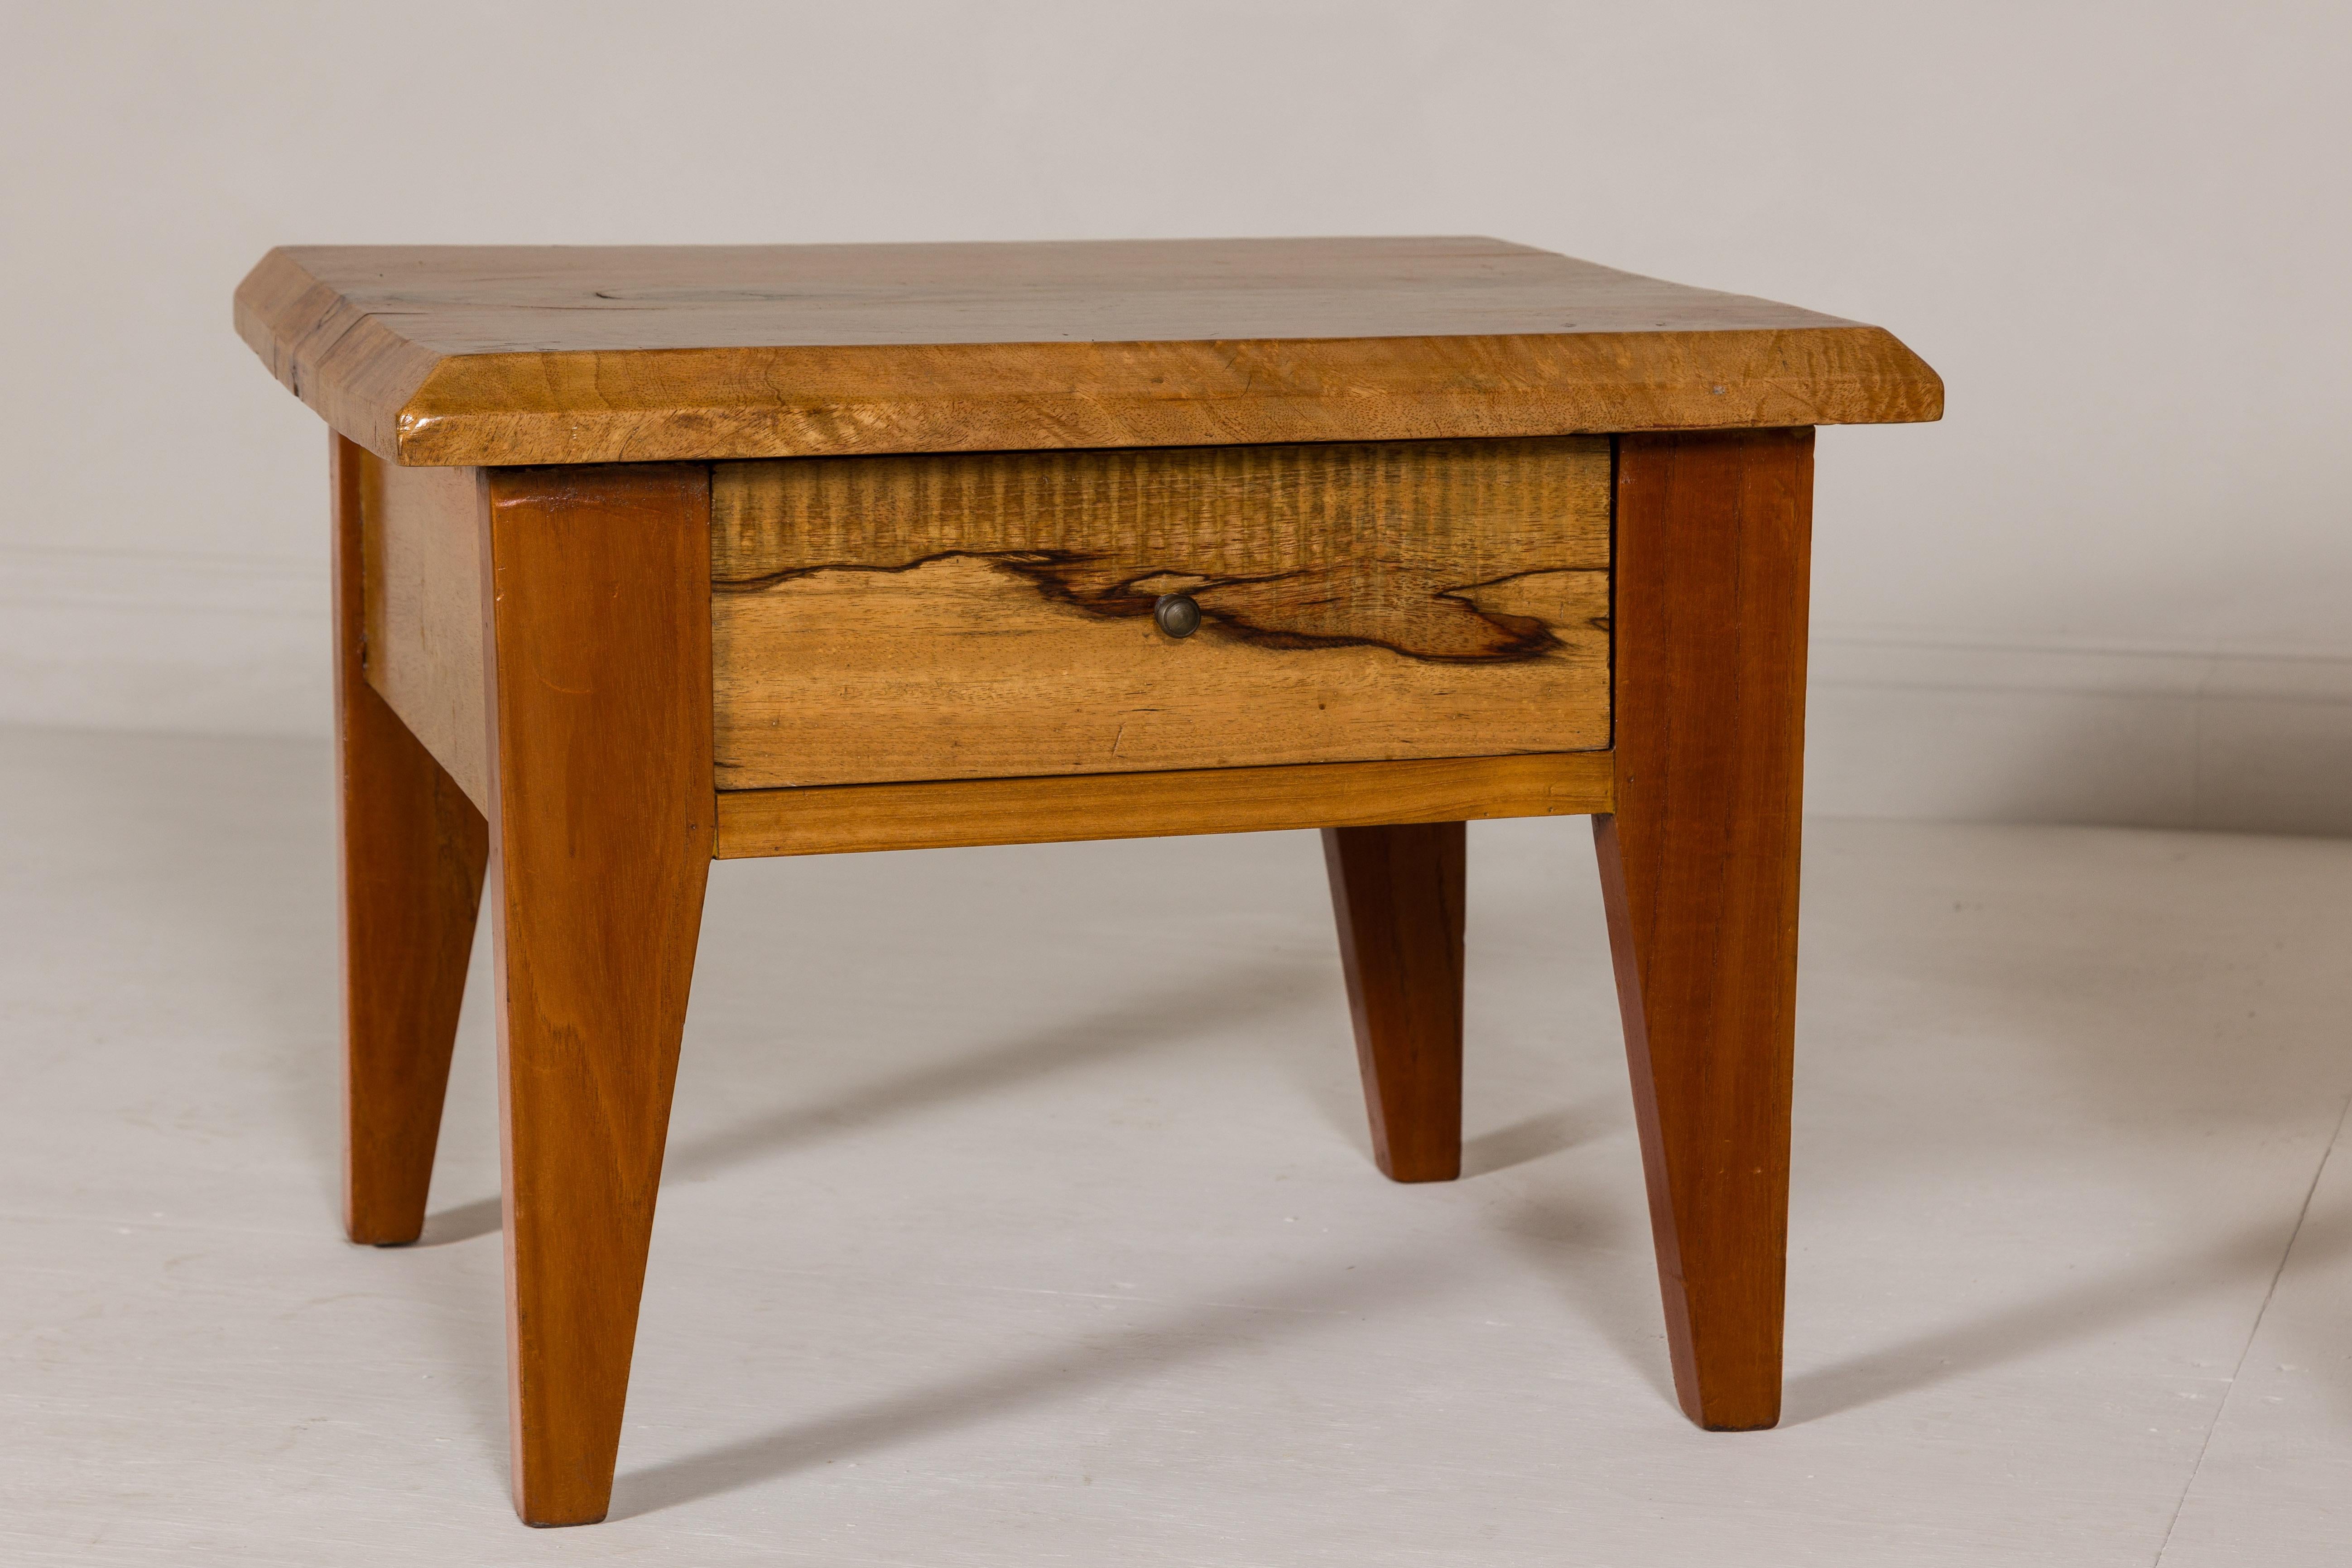 Near Pair of Mango Wood Midcentury Low Side Tables with Single Drawers In Good Condition For Sale In Yonkers, NY